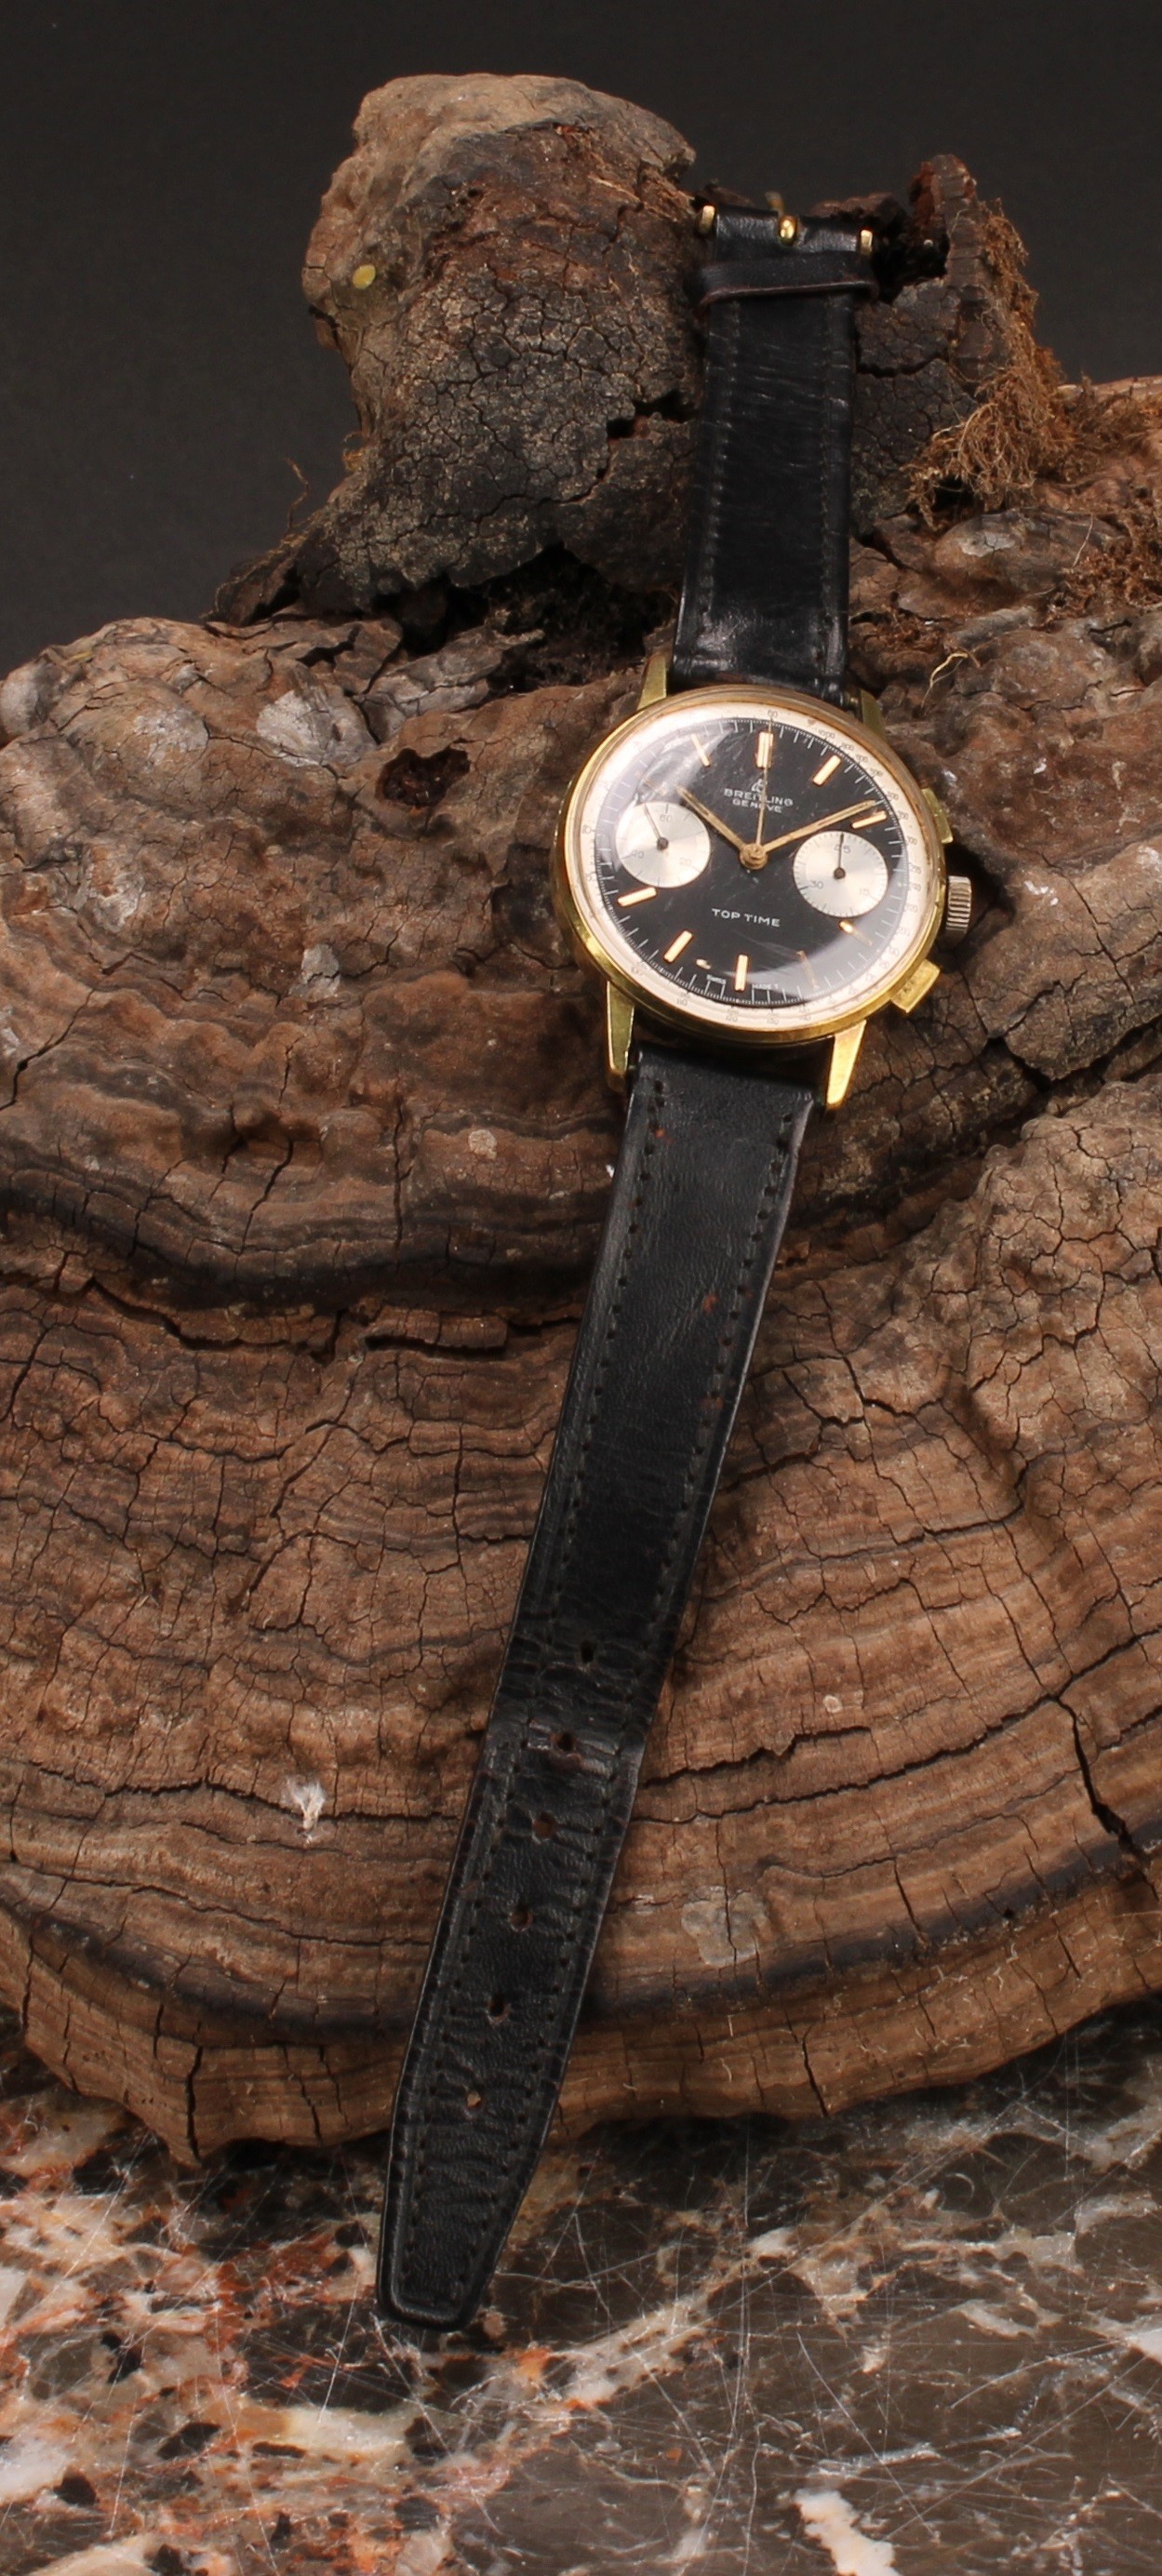 A gentleman's Breitling gold plated chronograph watch, Top Time, non-reflective dial, baton